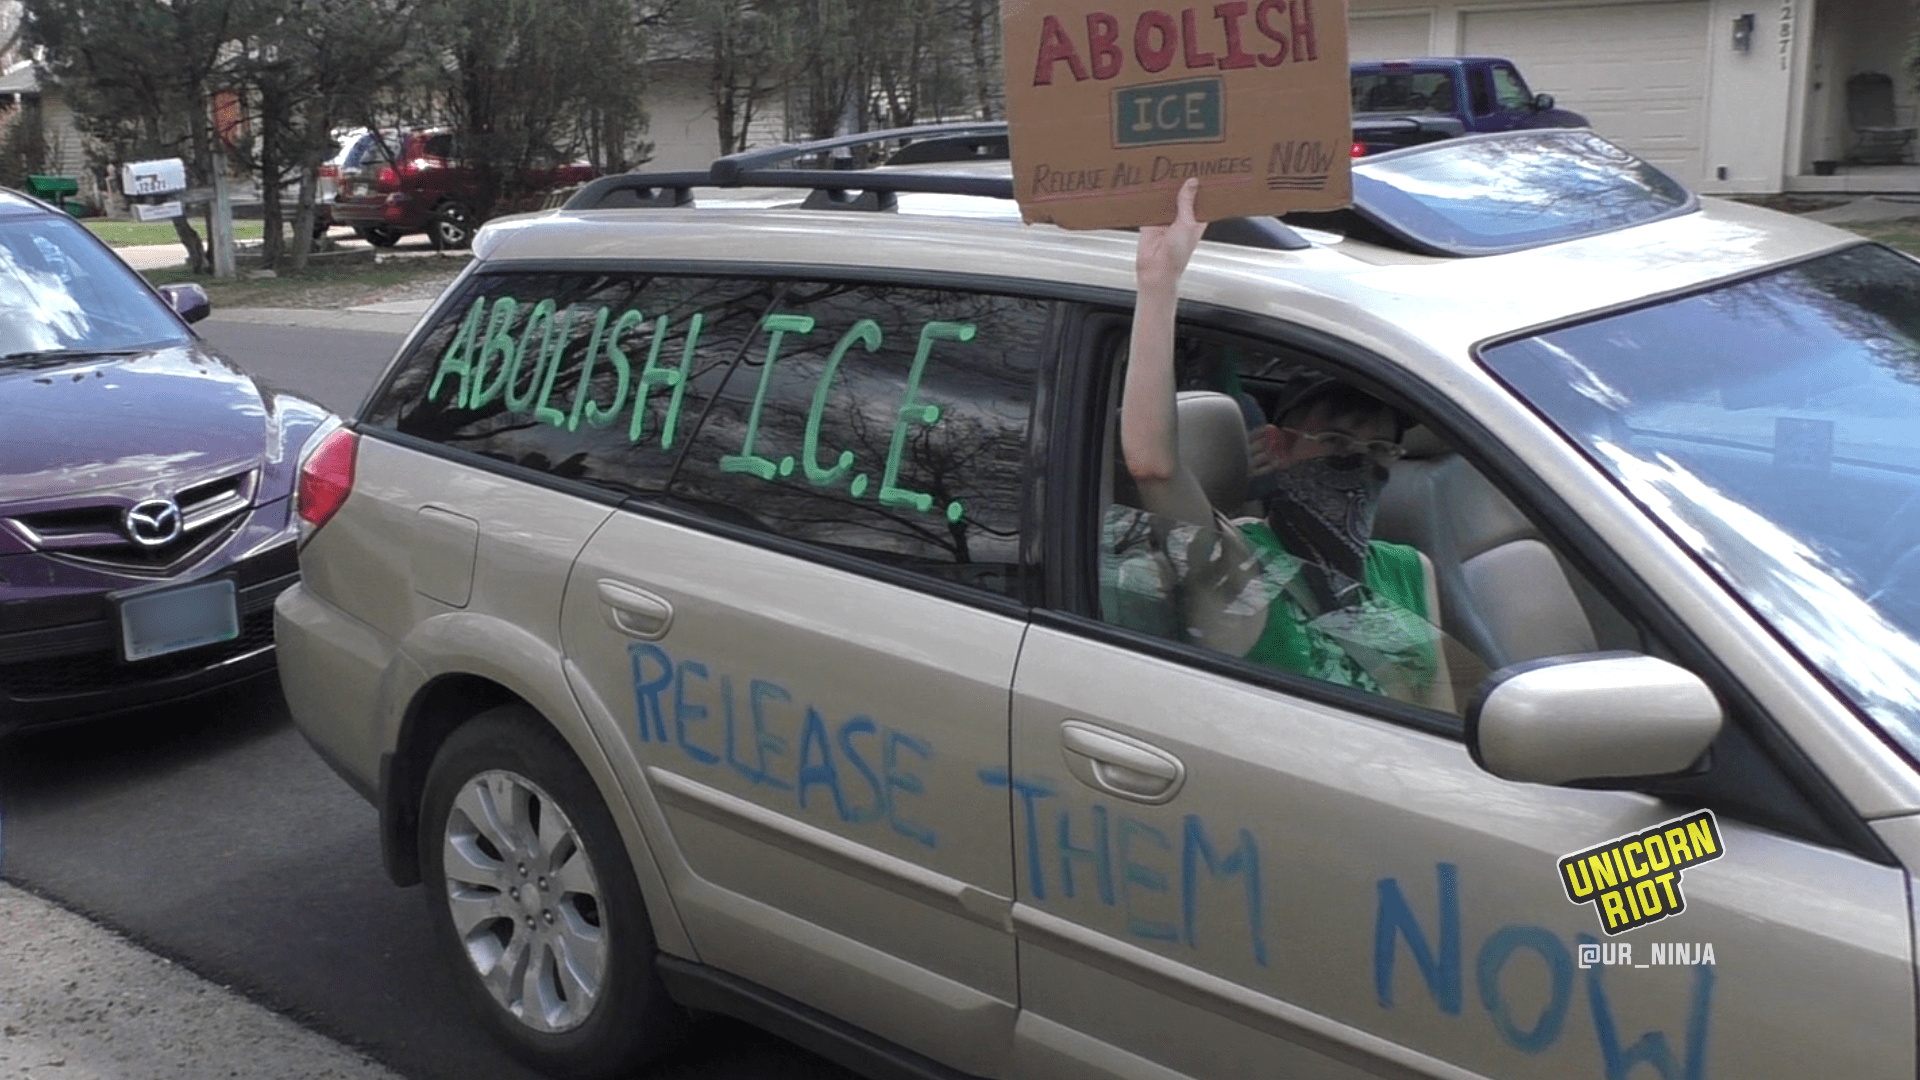 Image description: a gold minivan is painted with the words "Abolish I.C.E." and "Free Them Now" on the windows and sides of the vehicle. A protester's arm holds a sign aloft outside the passenger window; the sign reads "Abolish ICE"